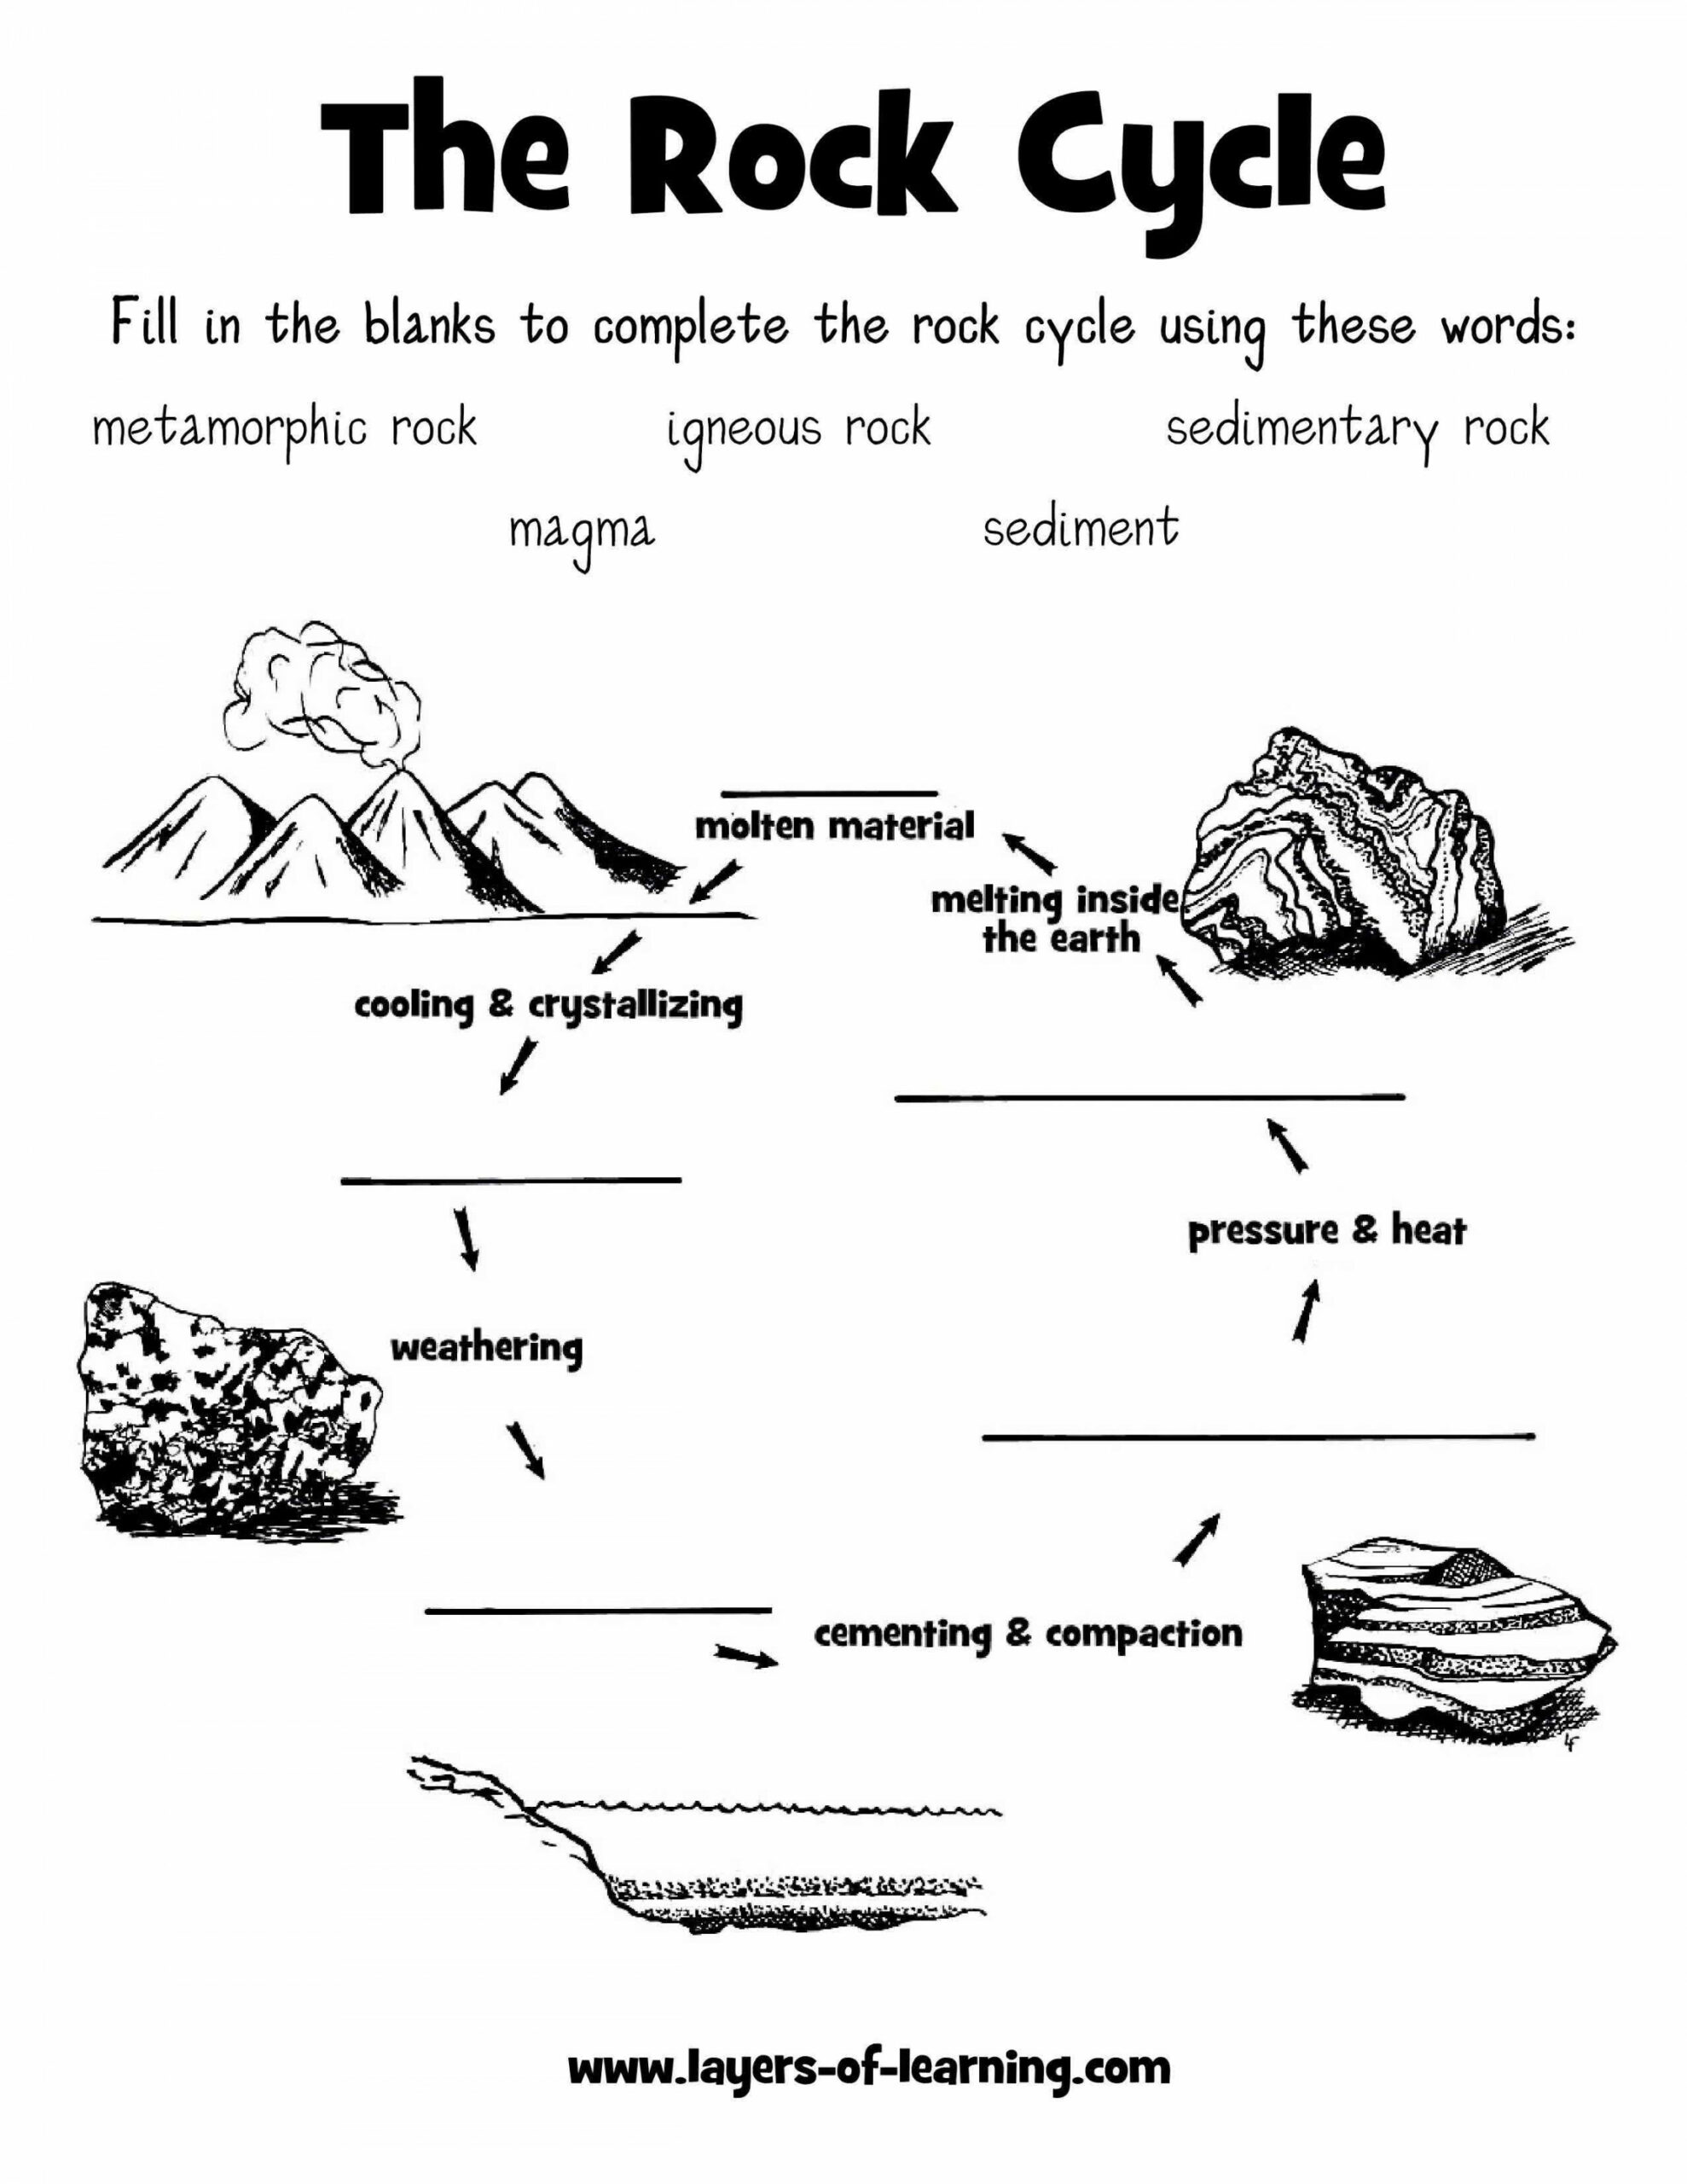 rock cycle worksheet layers of learning science science scaled